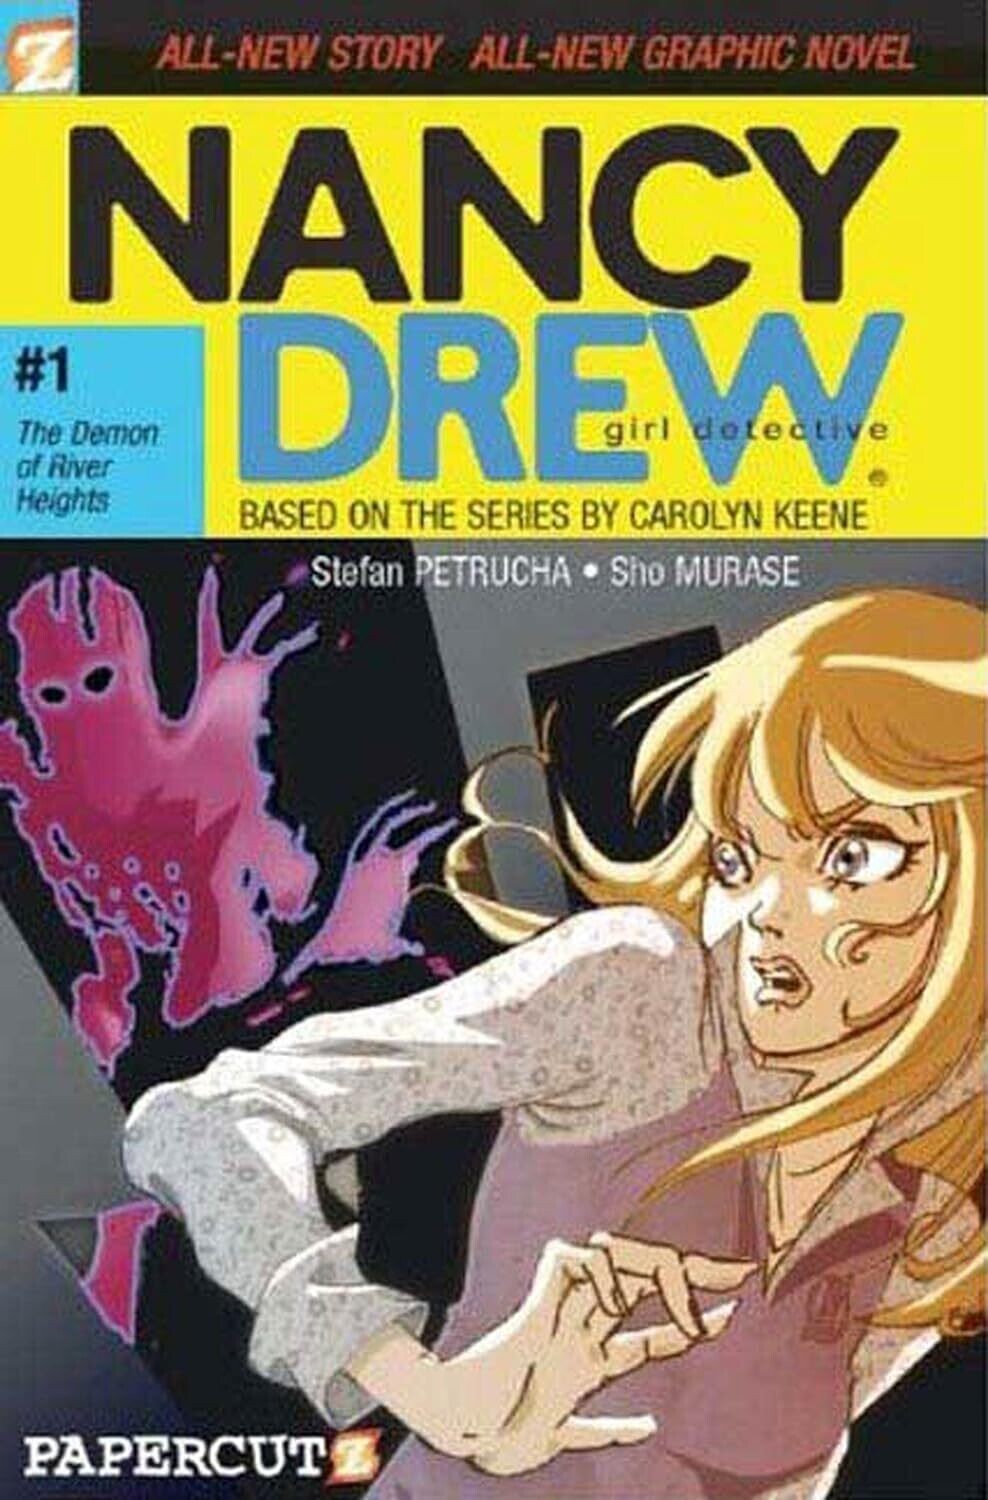 The Demon of River Heights (Nancy Drew Graphic Novels: Girl Detective #1)